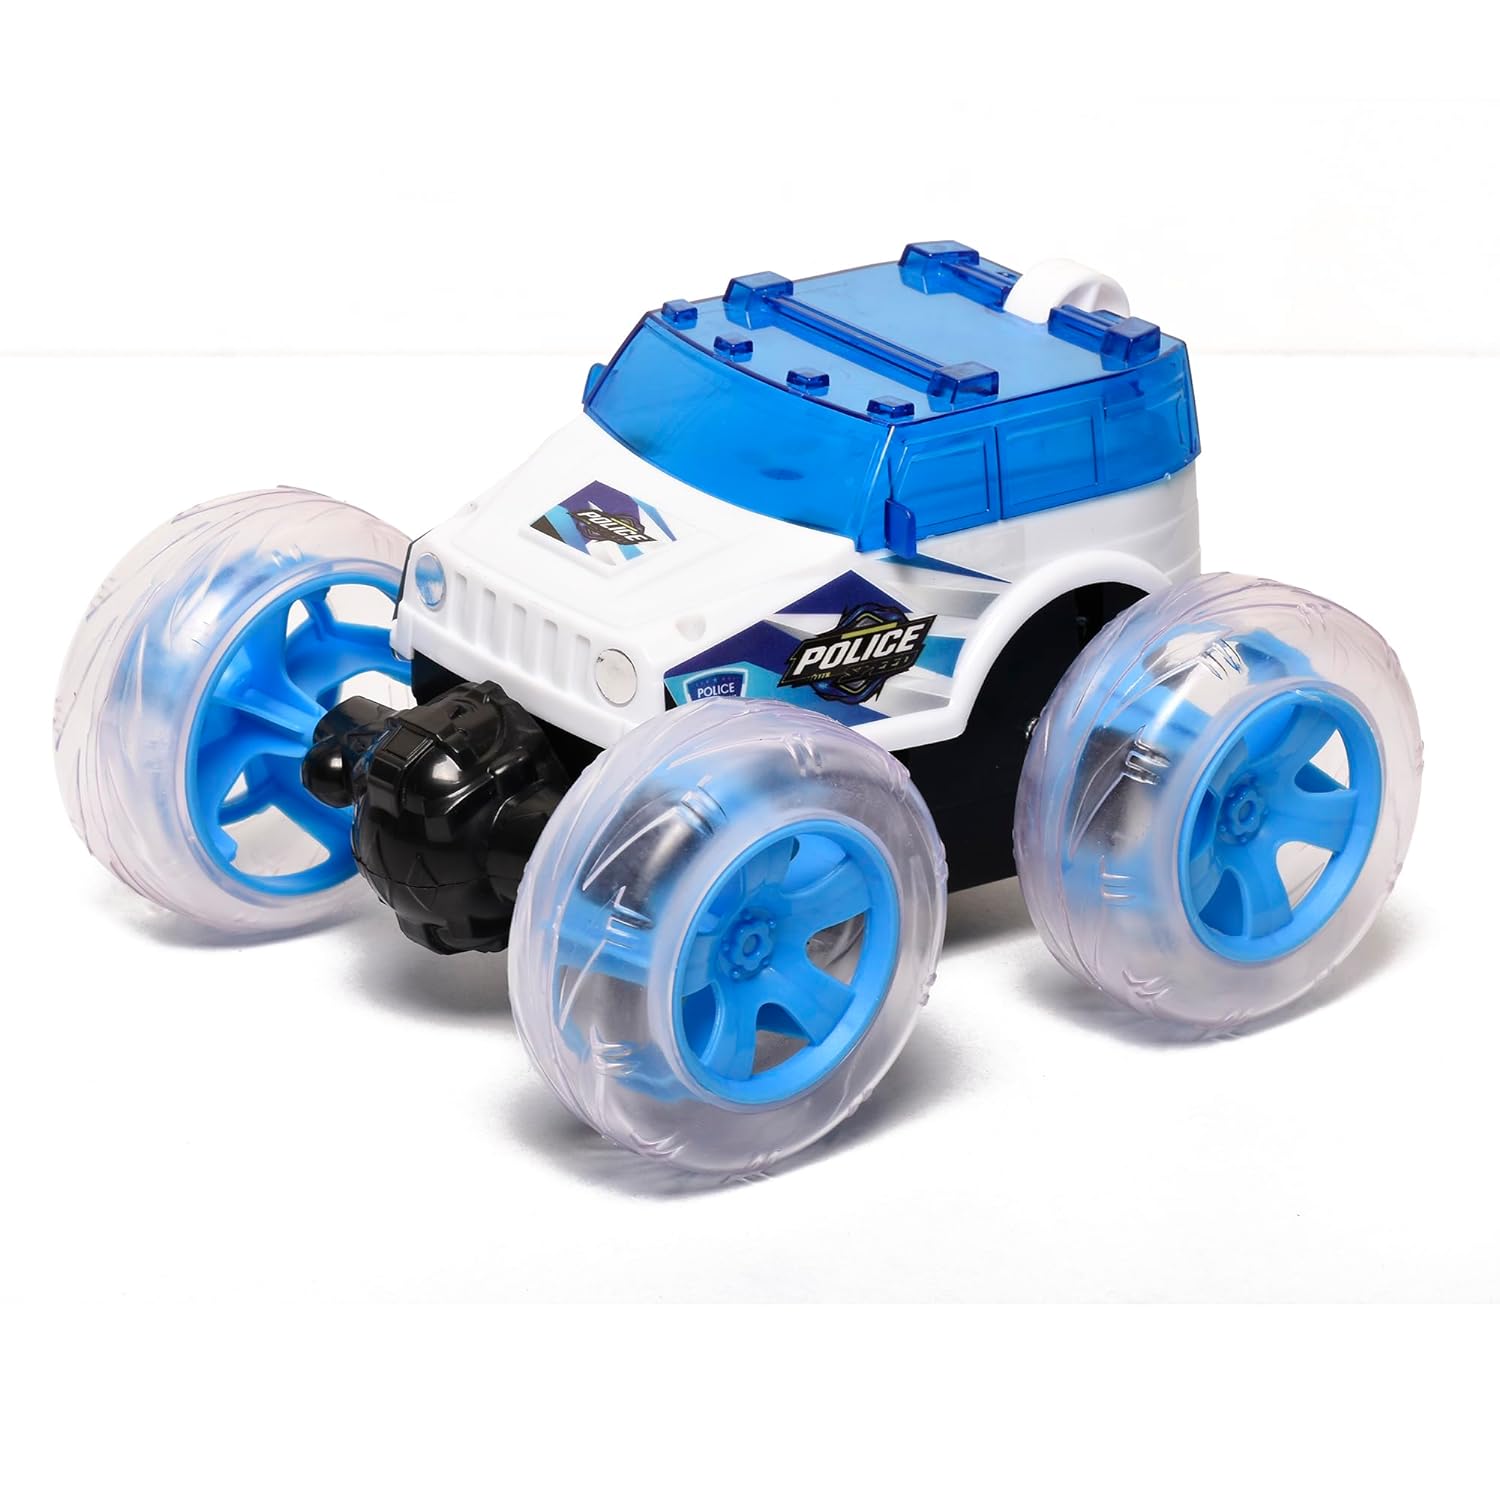 Braintastic 4x4 Off-Road Police Acrobat Rechargeable RC Remote Control 360 Degree Stunt Function Twisting Car with 5D Colorful Lights & Music Toys for Kids 5+Years (Blue)